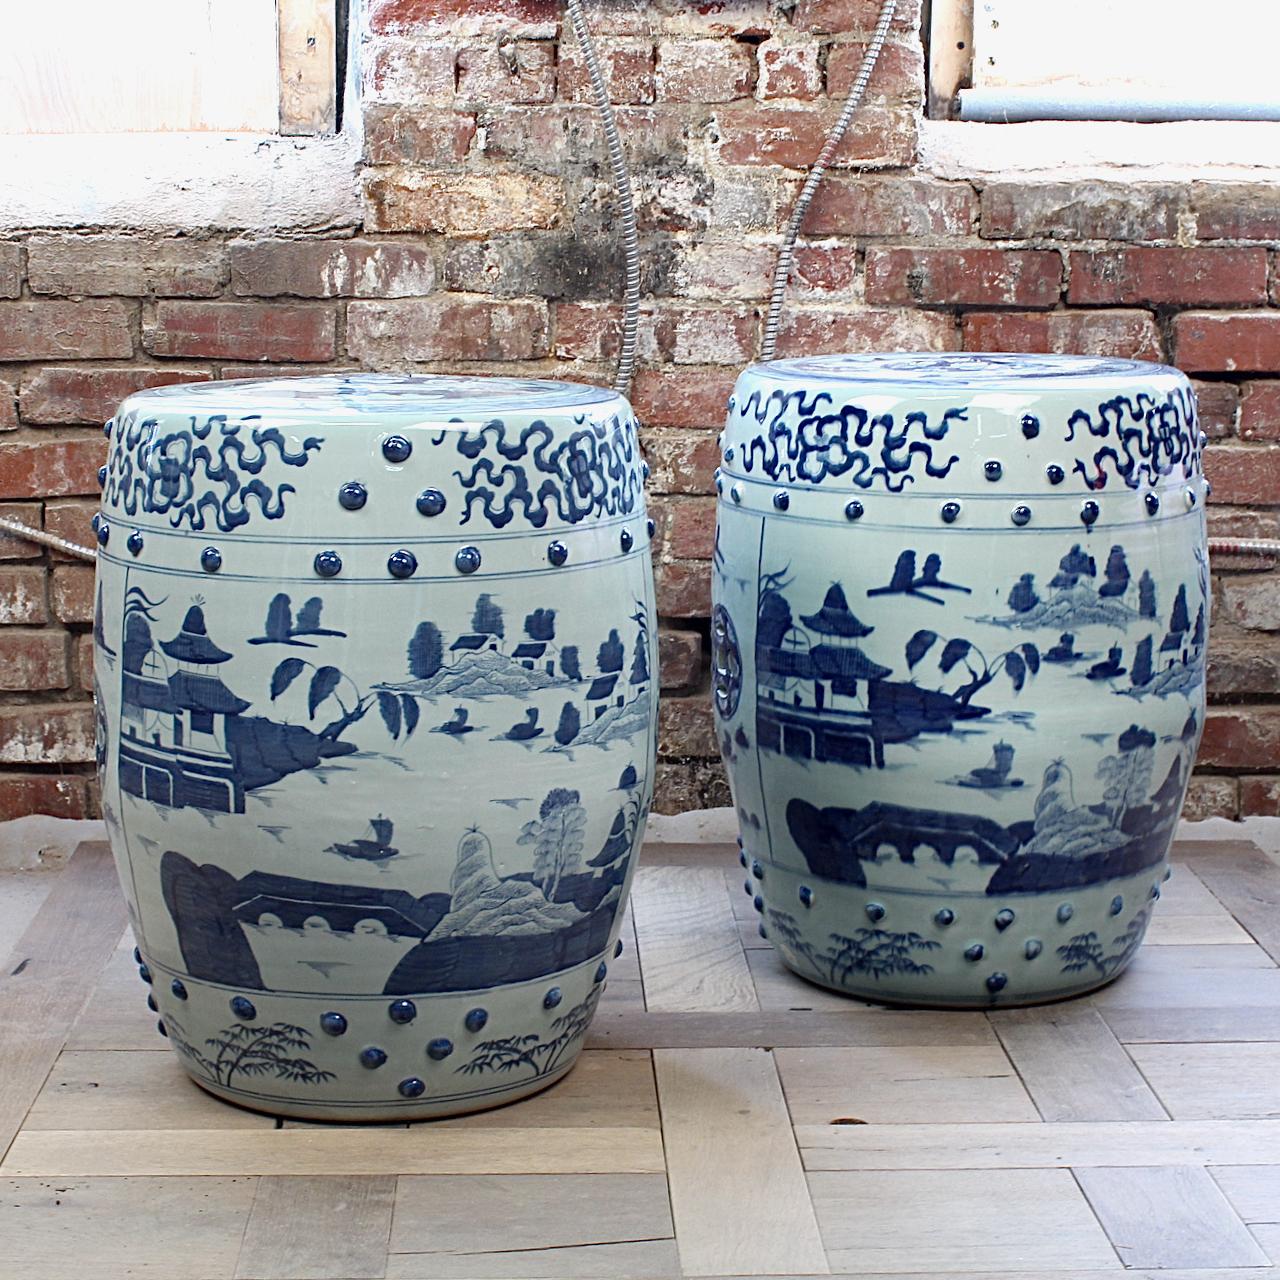 A very fine pair of Chinese Export porcelain garden seats. 

Of modern manufacture in the style of antique canton seats.

In the typical barrel form with blue underglaze decoration.

Simply great design and good detail! A smart pair of garden